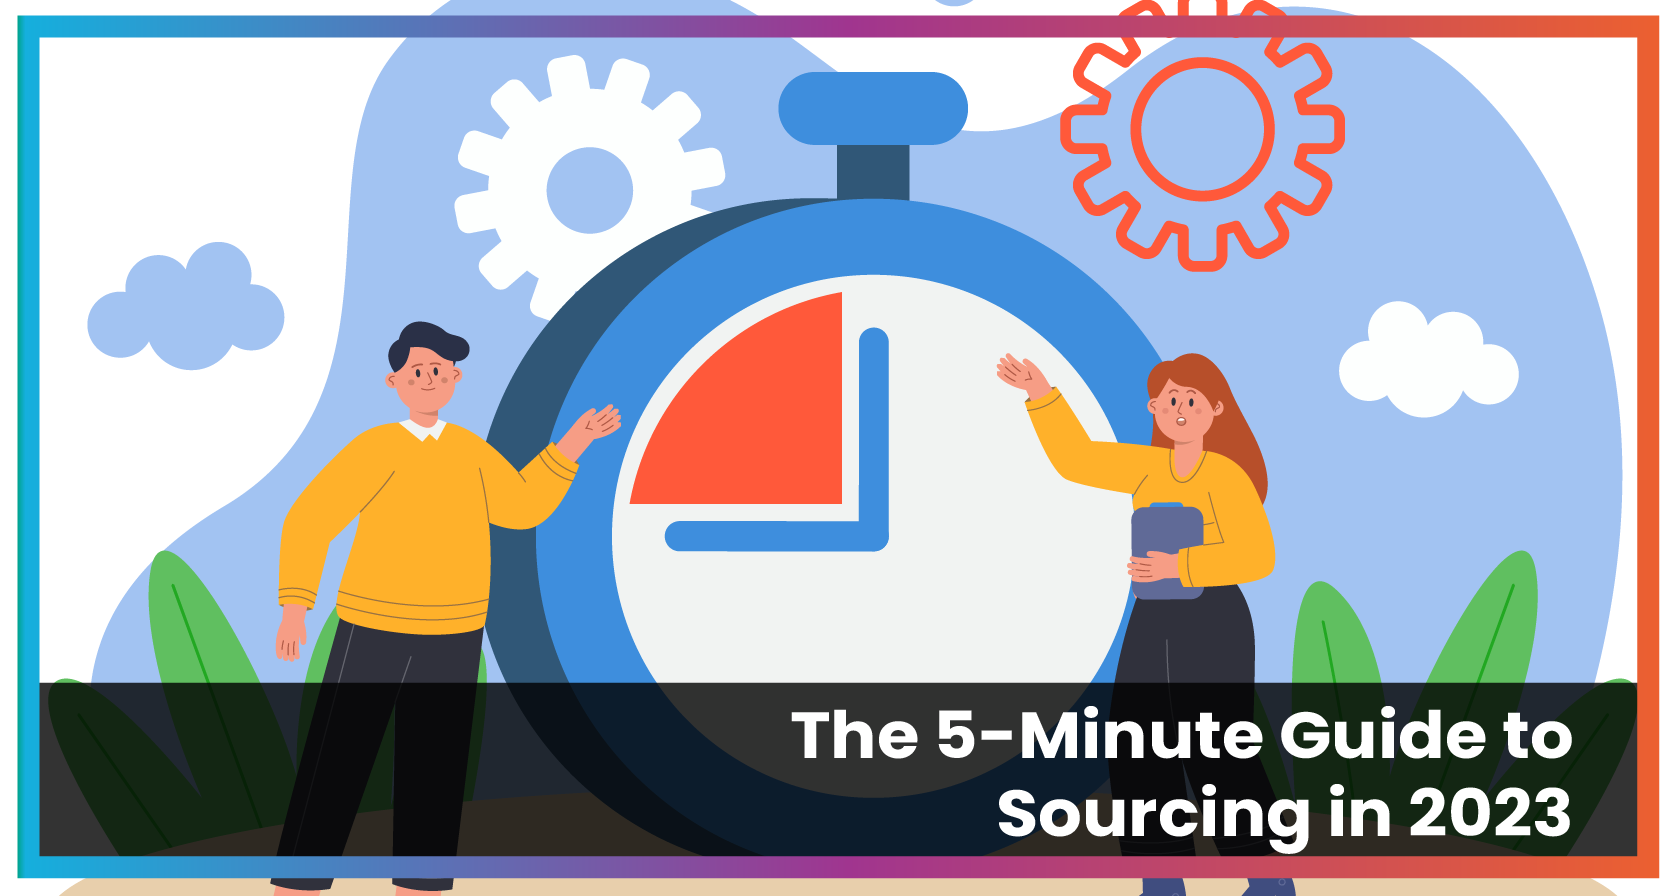 The 5-Minute Guide to Sourcing in 2023